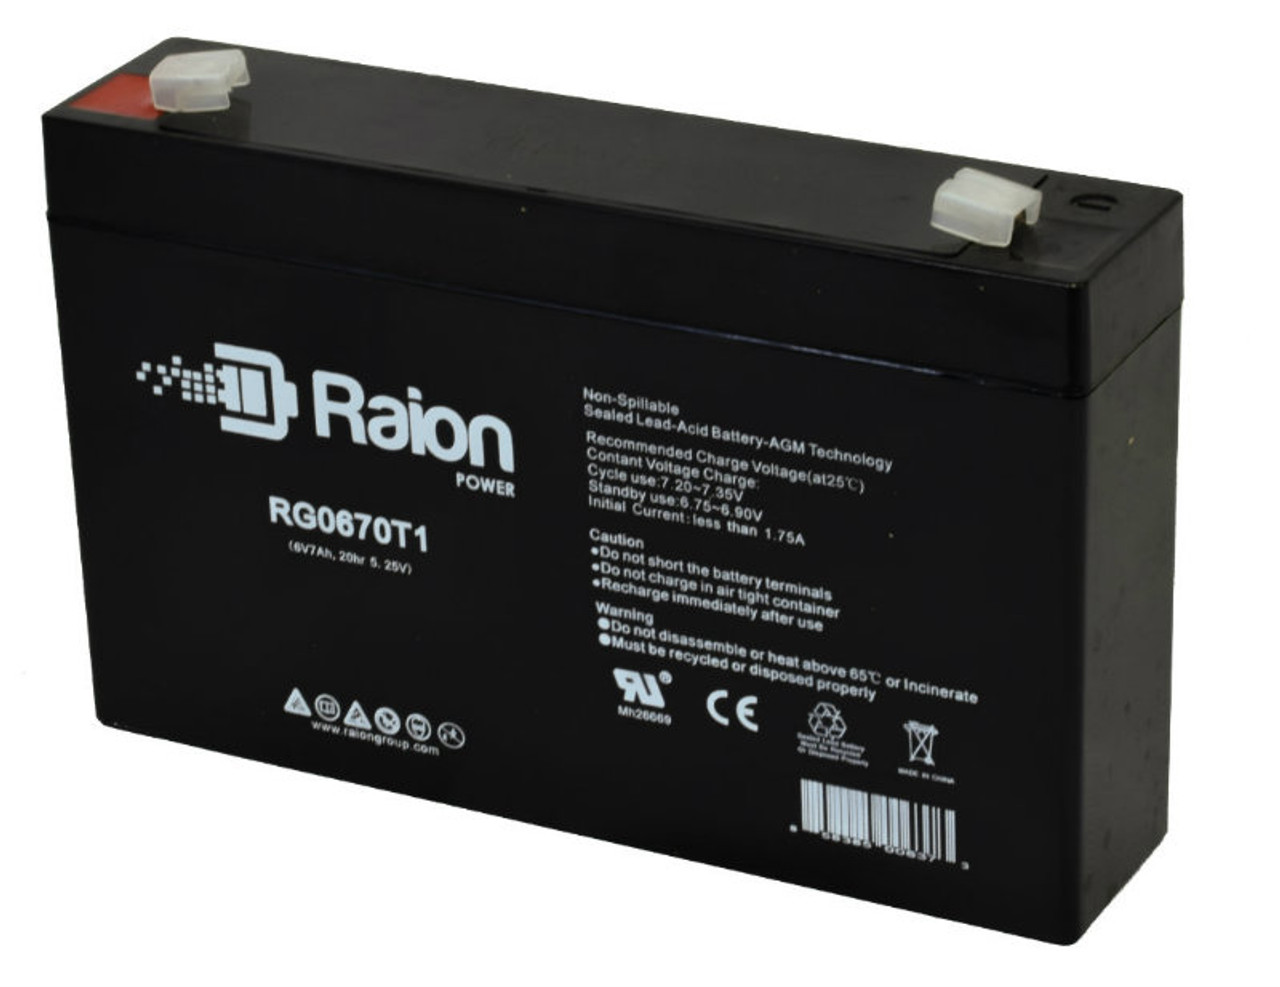 Raion Power RG0670T1 6V 7Ah Replacement Emergency Lighting Battery for Lithonia ELB0607